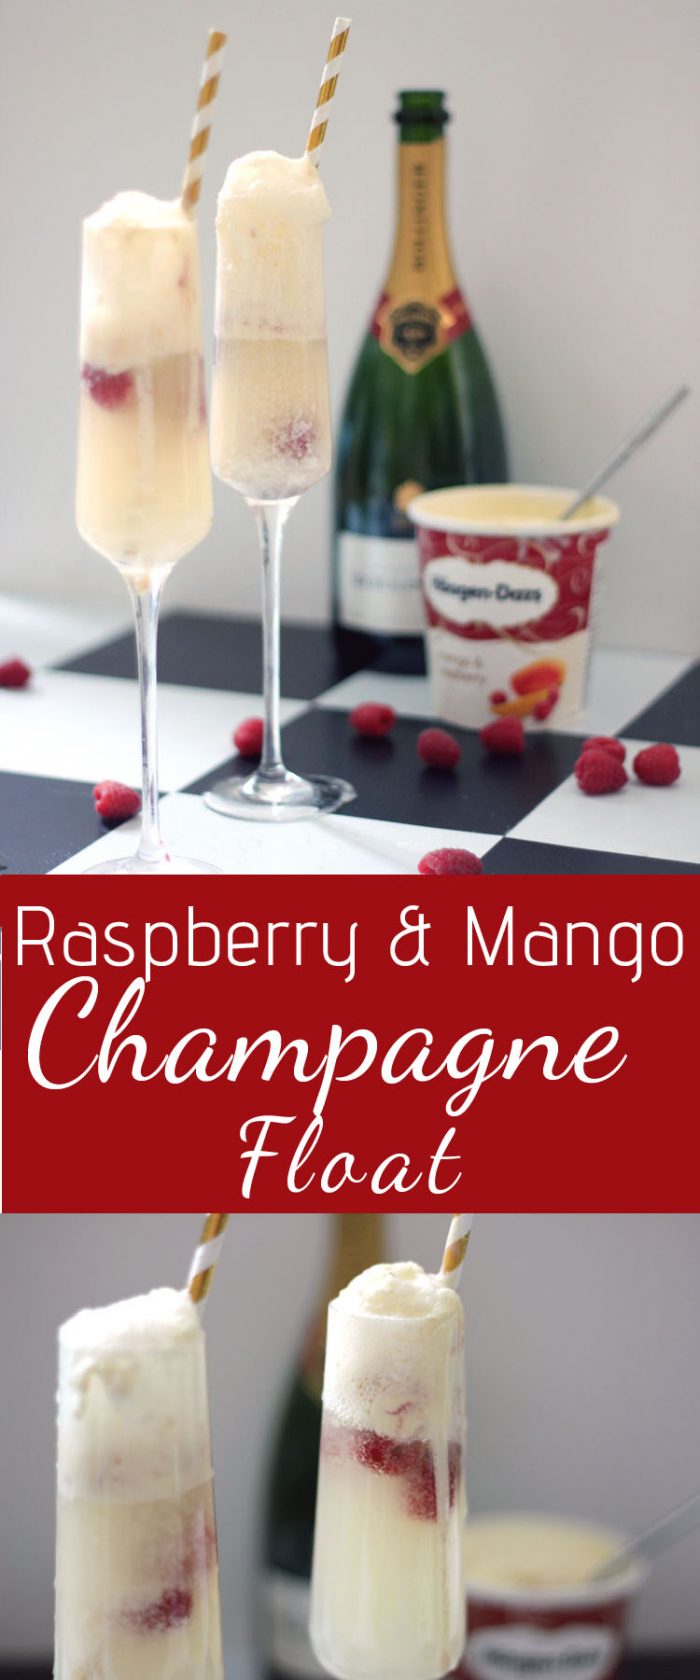 Raspberry and Mango Champagne Float Cocktail with Haagen Dazs Ice Cream and Fresh Raspberries